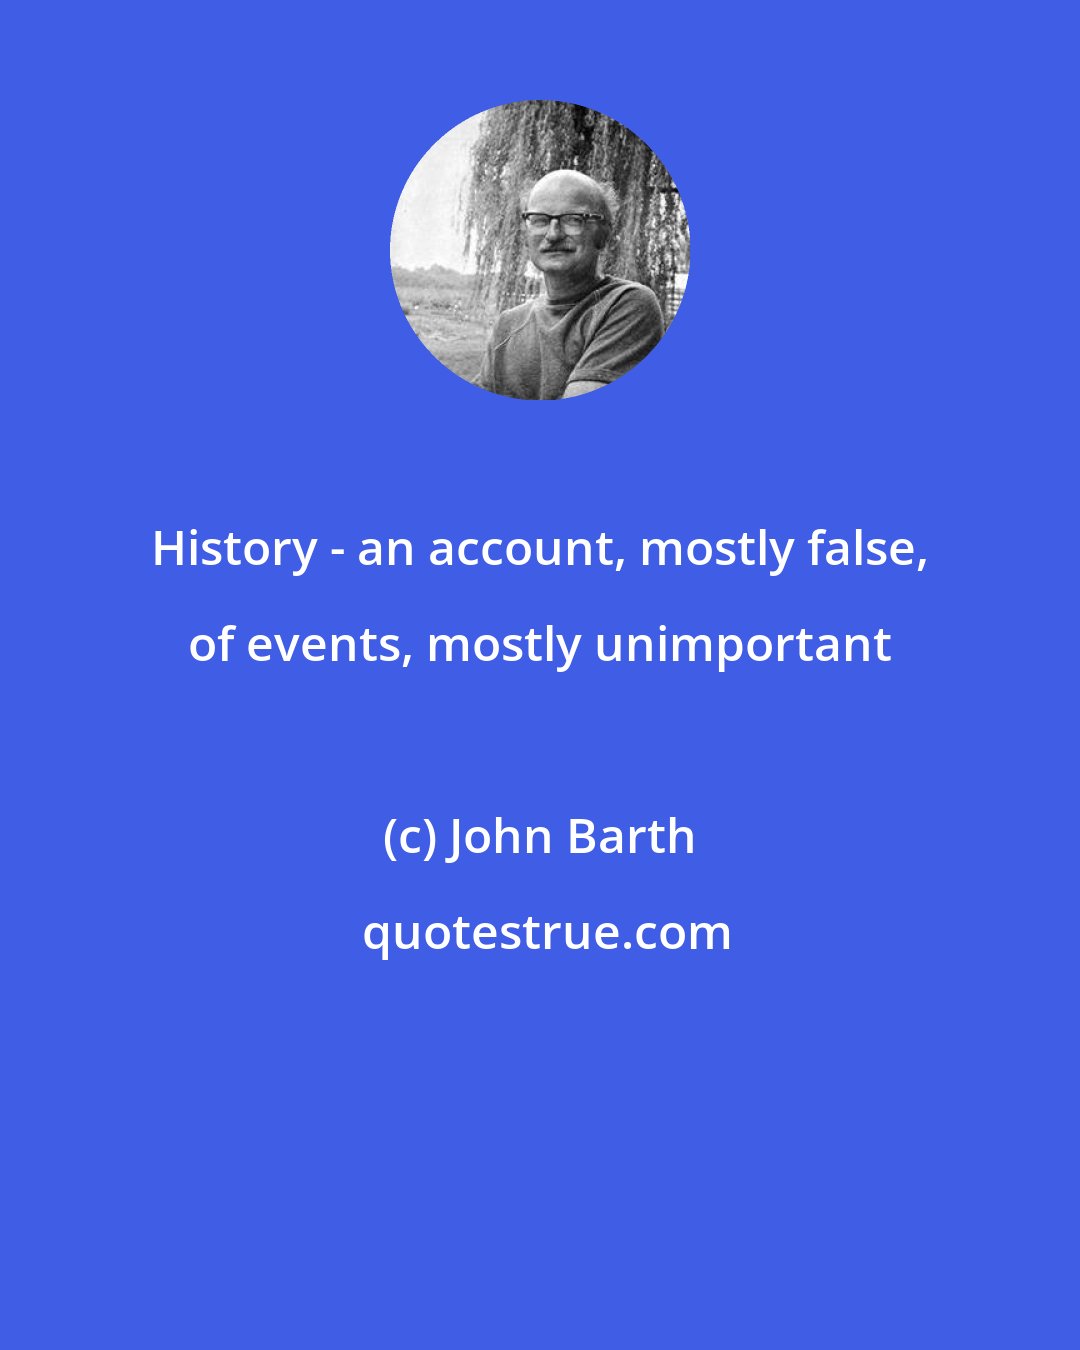 John Barth: History - an account, mostly false, of events, mostly unimportant